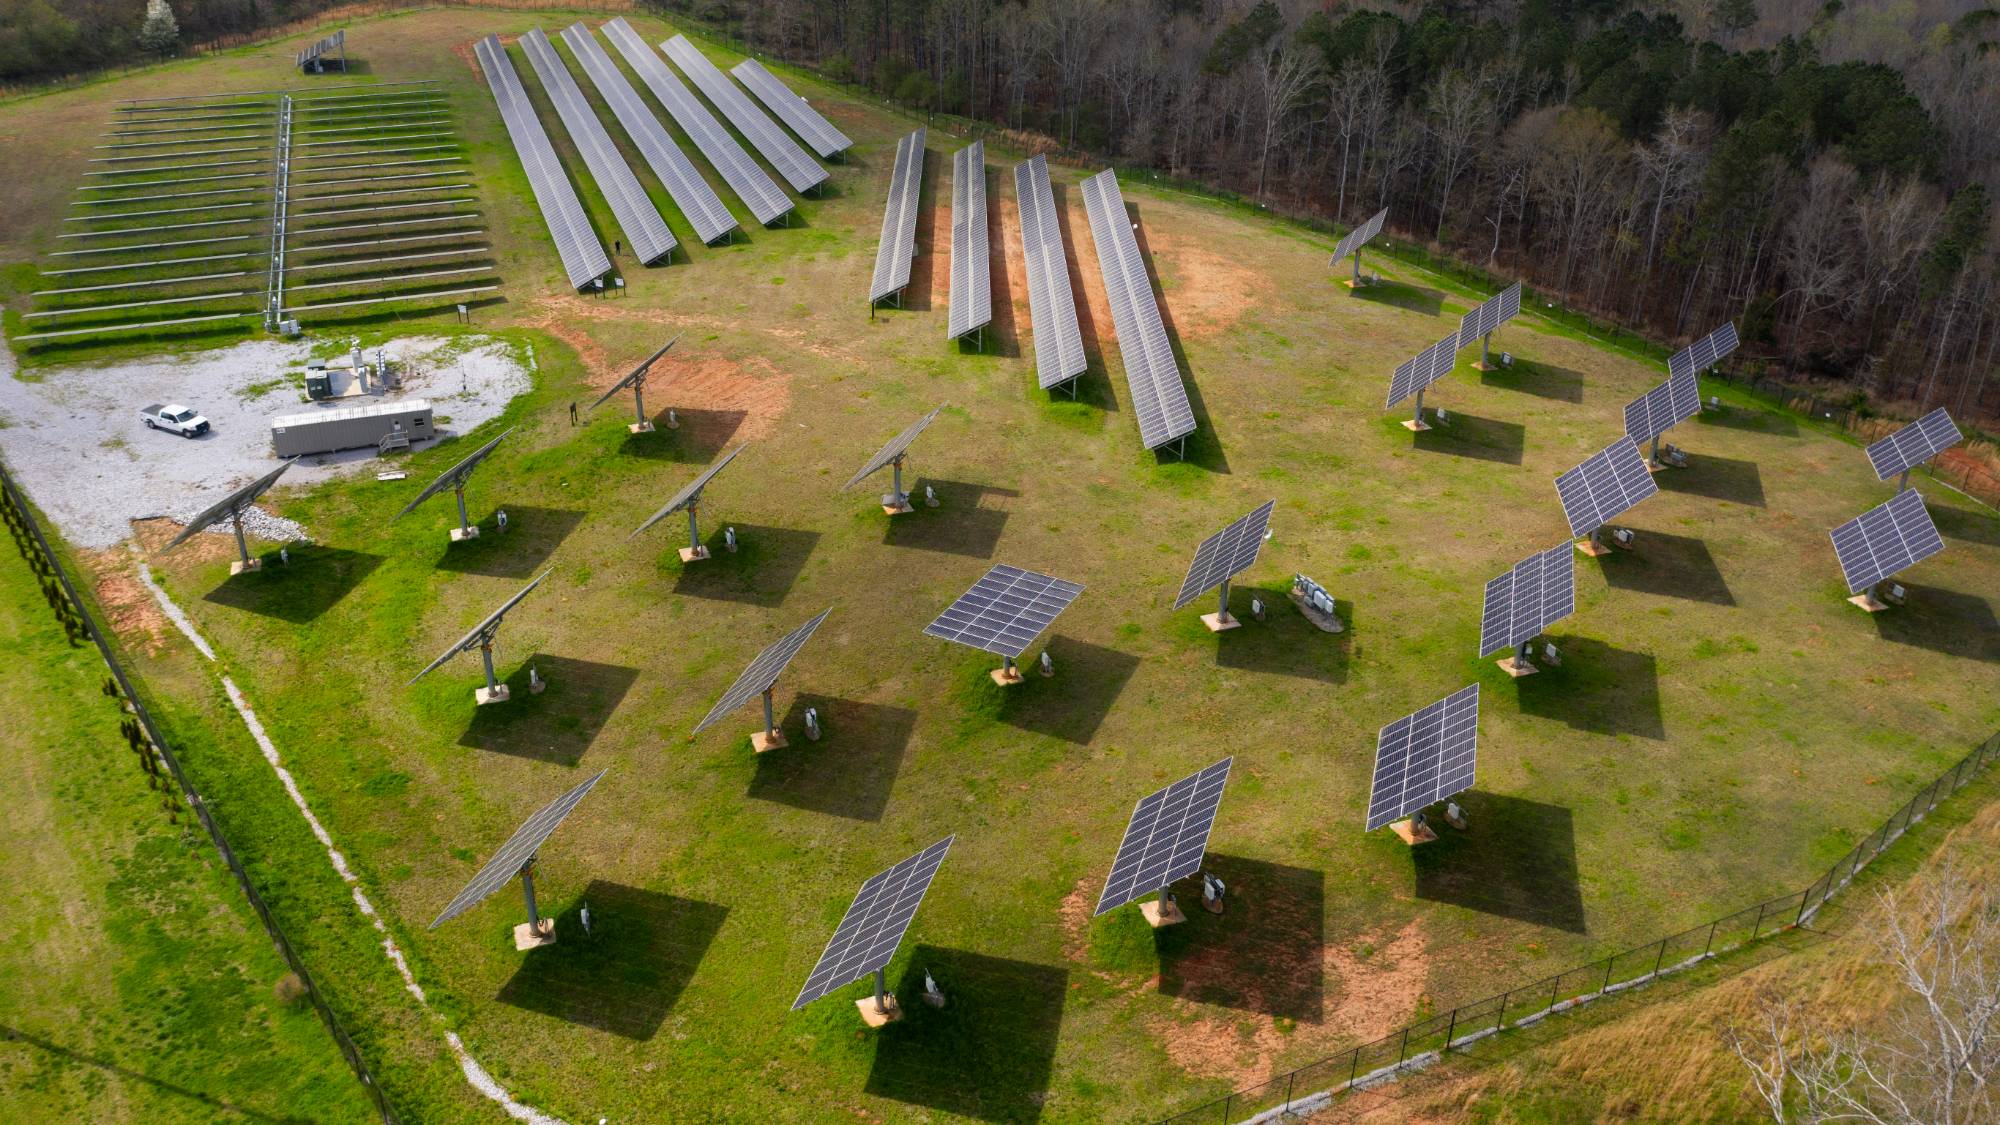 An aerial view of a field of solar panels